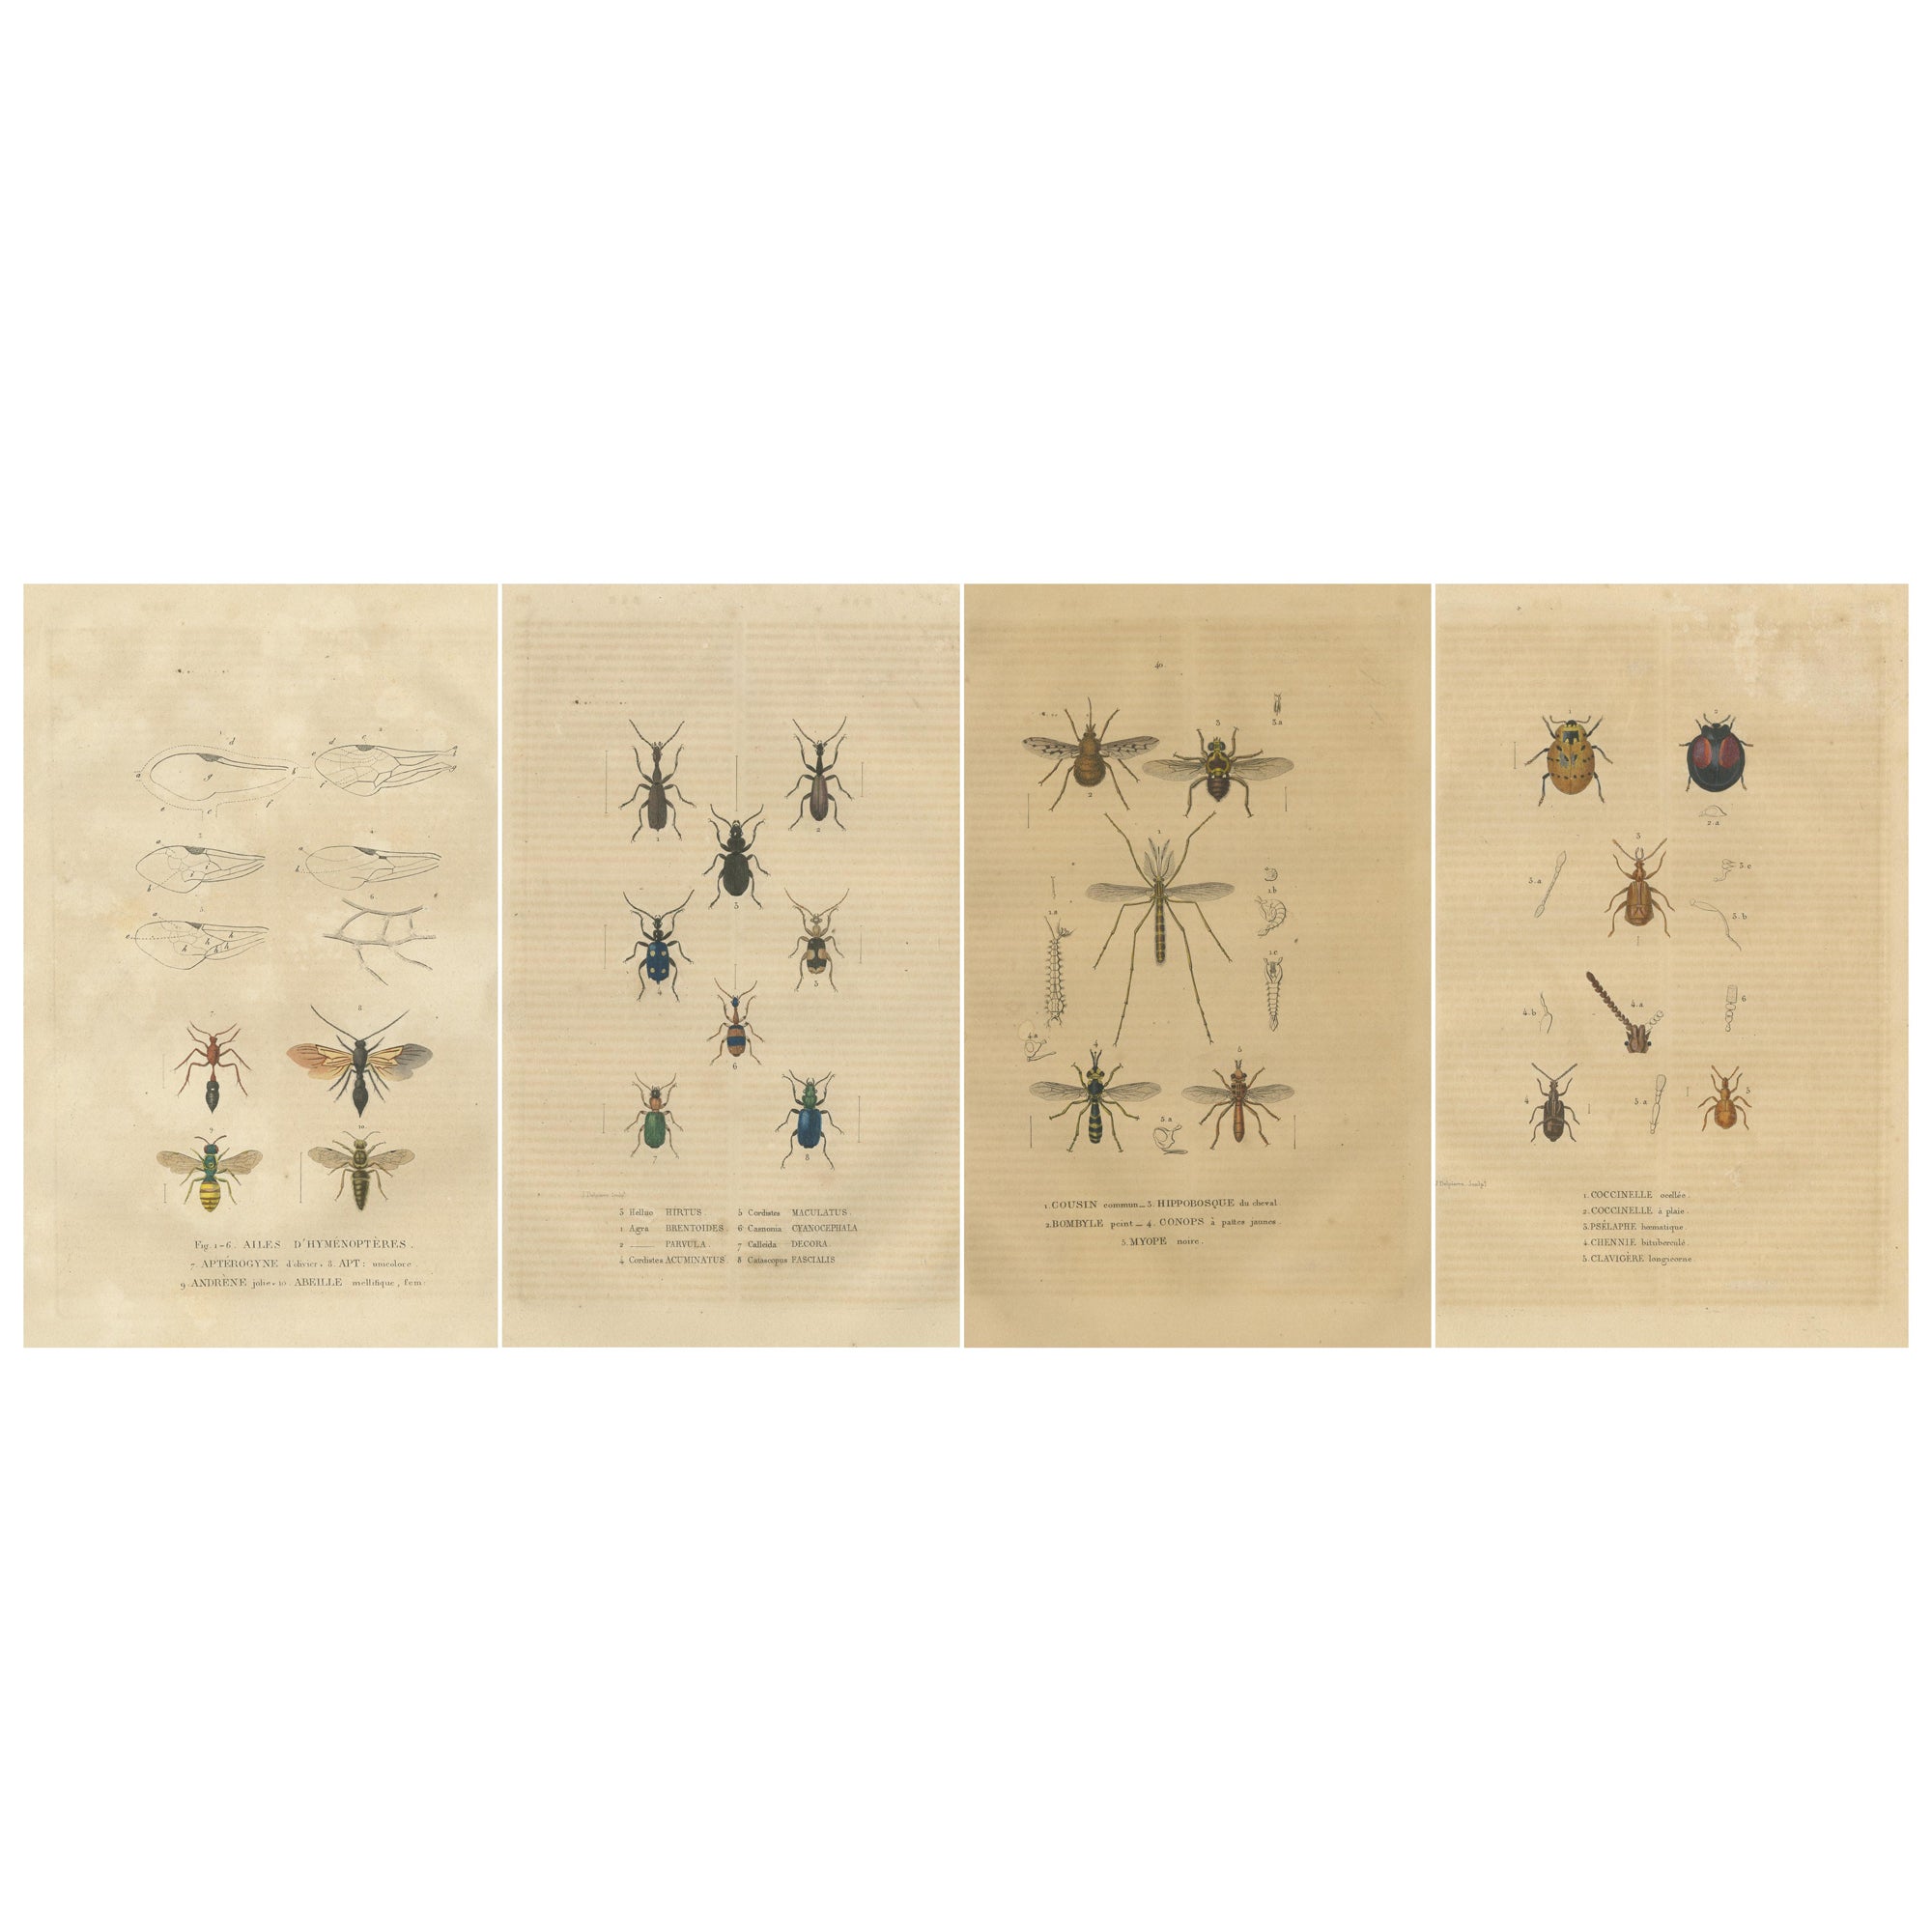 1845 Entomological Treasury: A Detailed Study of Insect Diversity For Sale